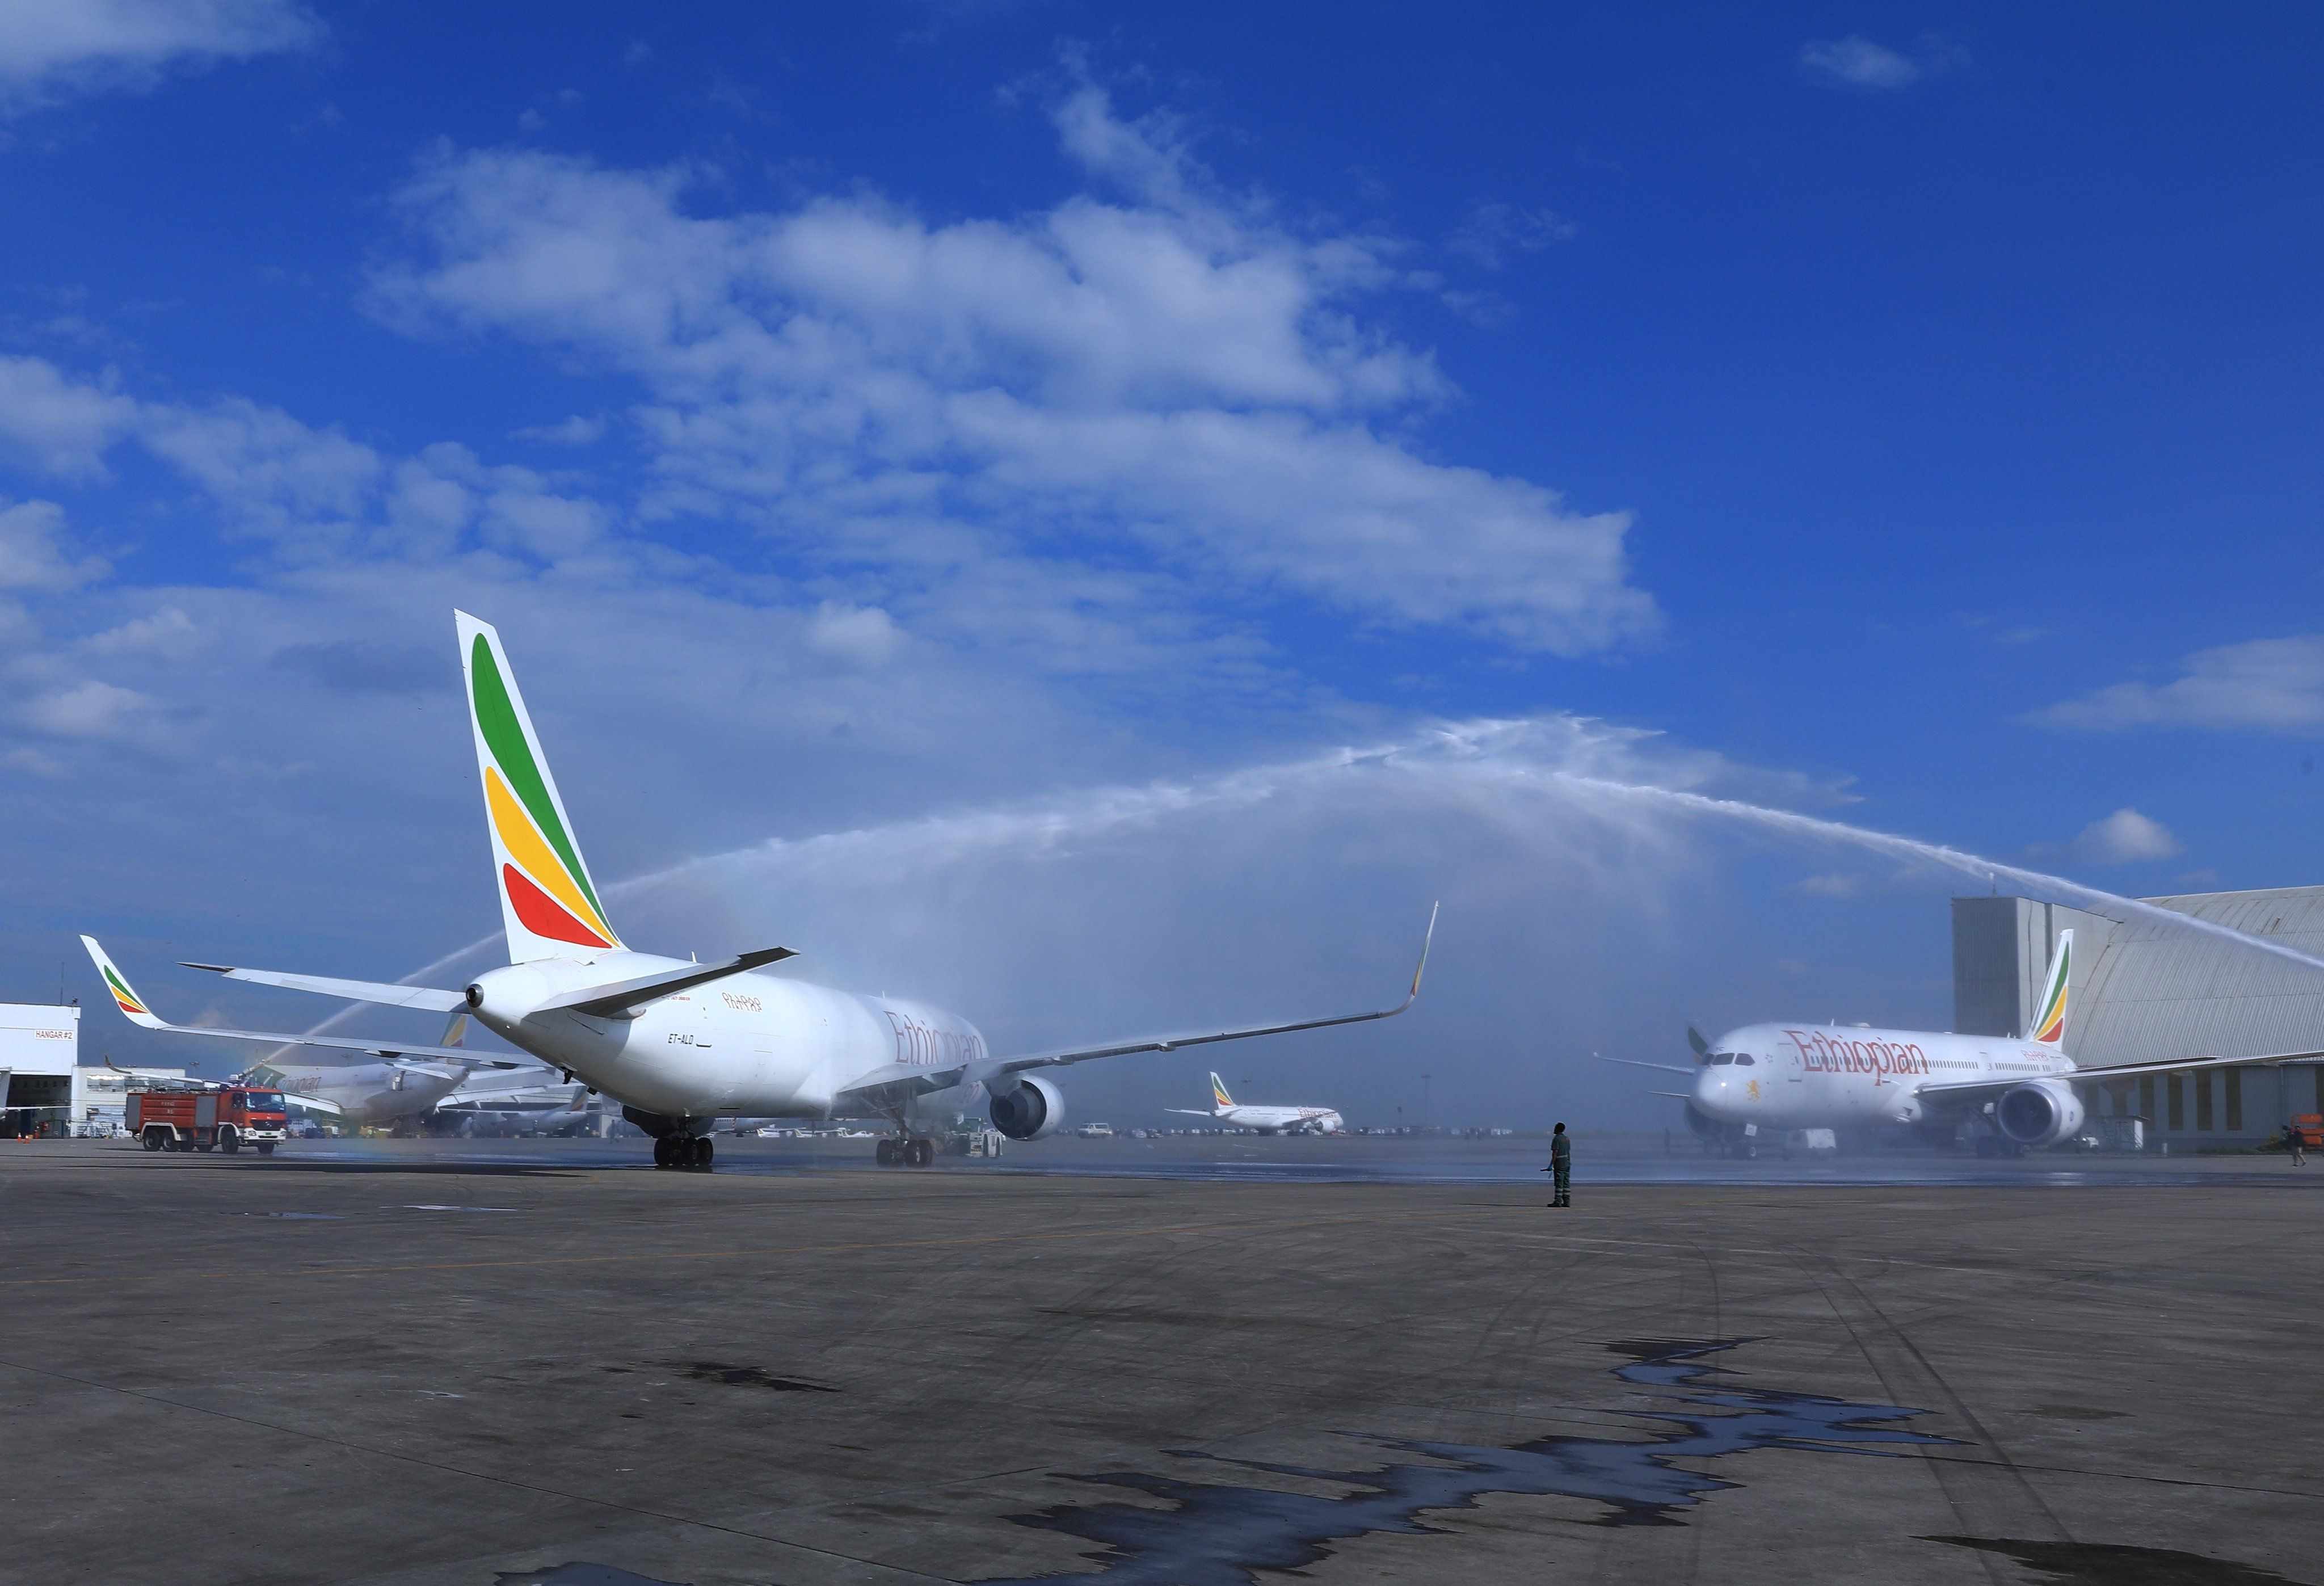 Ethiopian Airlines Shows Off Its First Boeing 767 Freighter Conversion